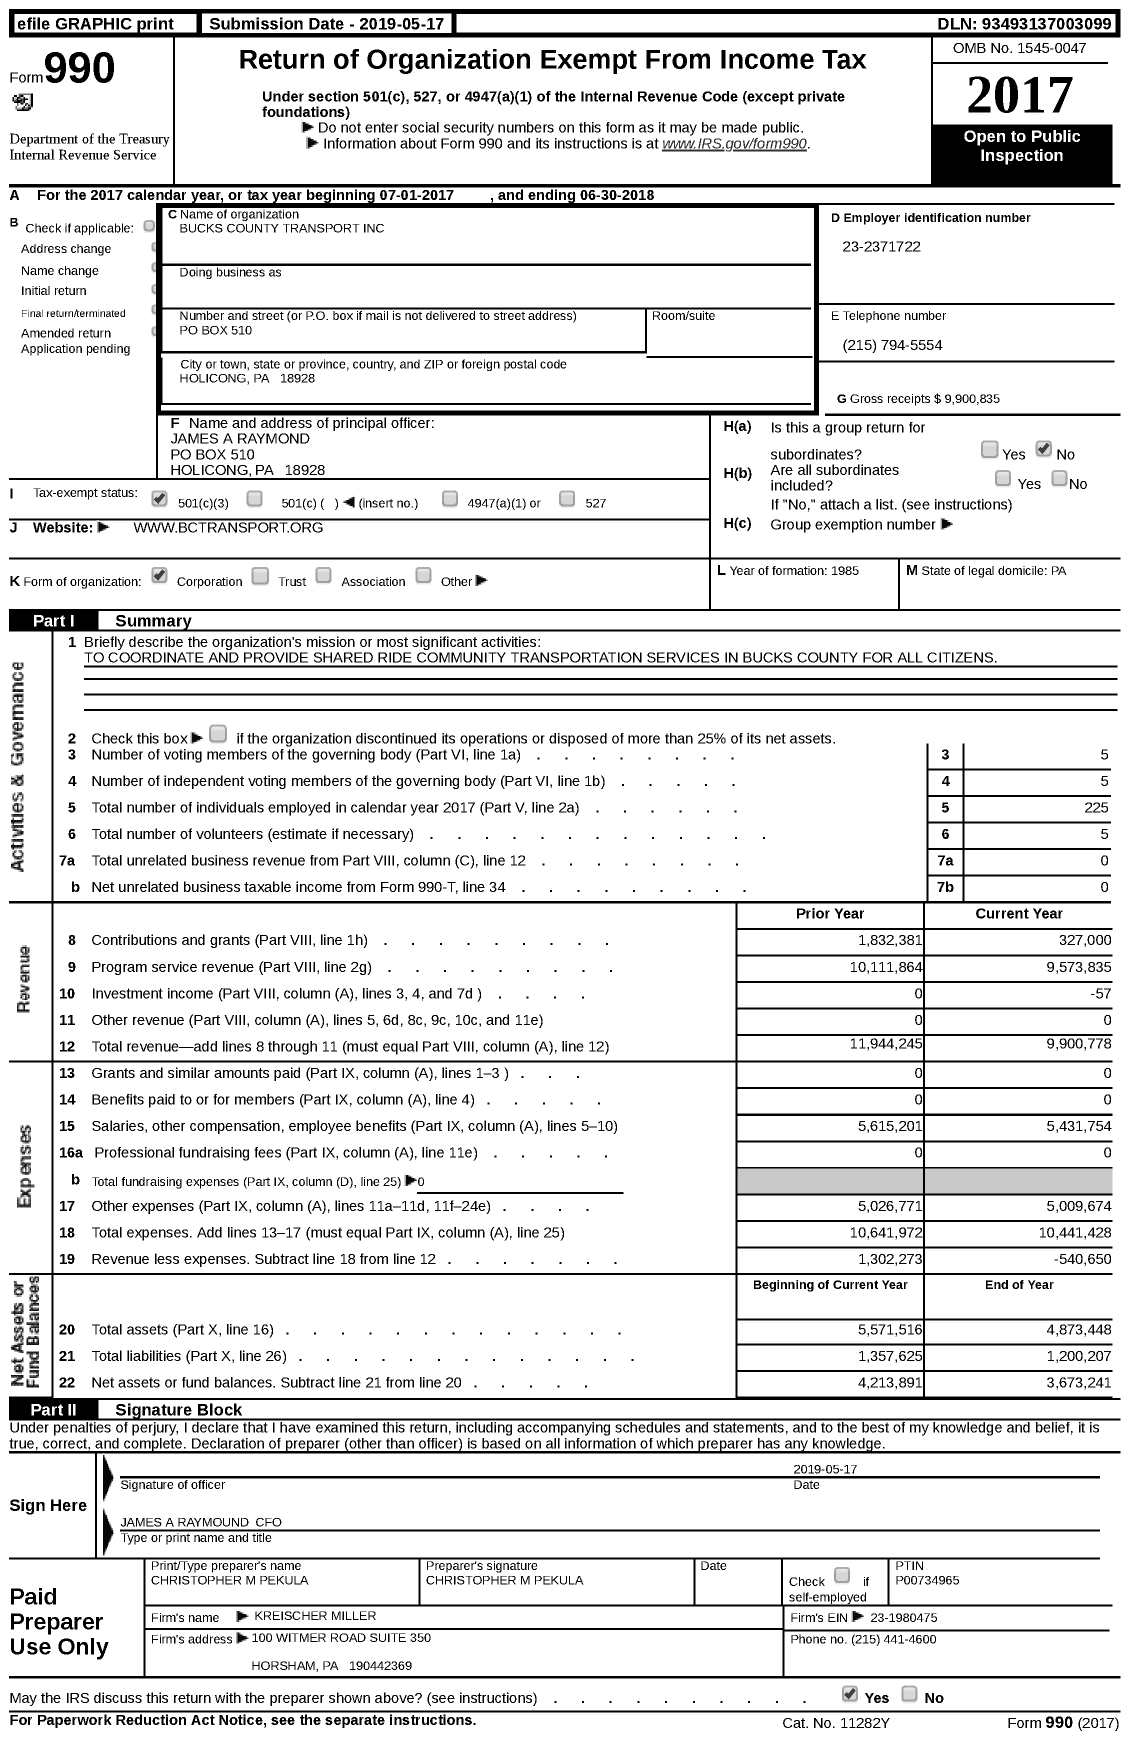 Image of first page of 2017 Form 990 for Bucks County Transport (BCT)